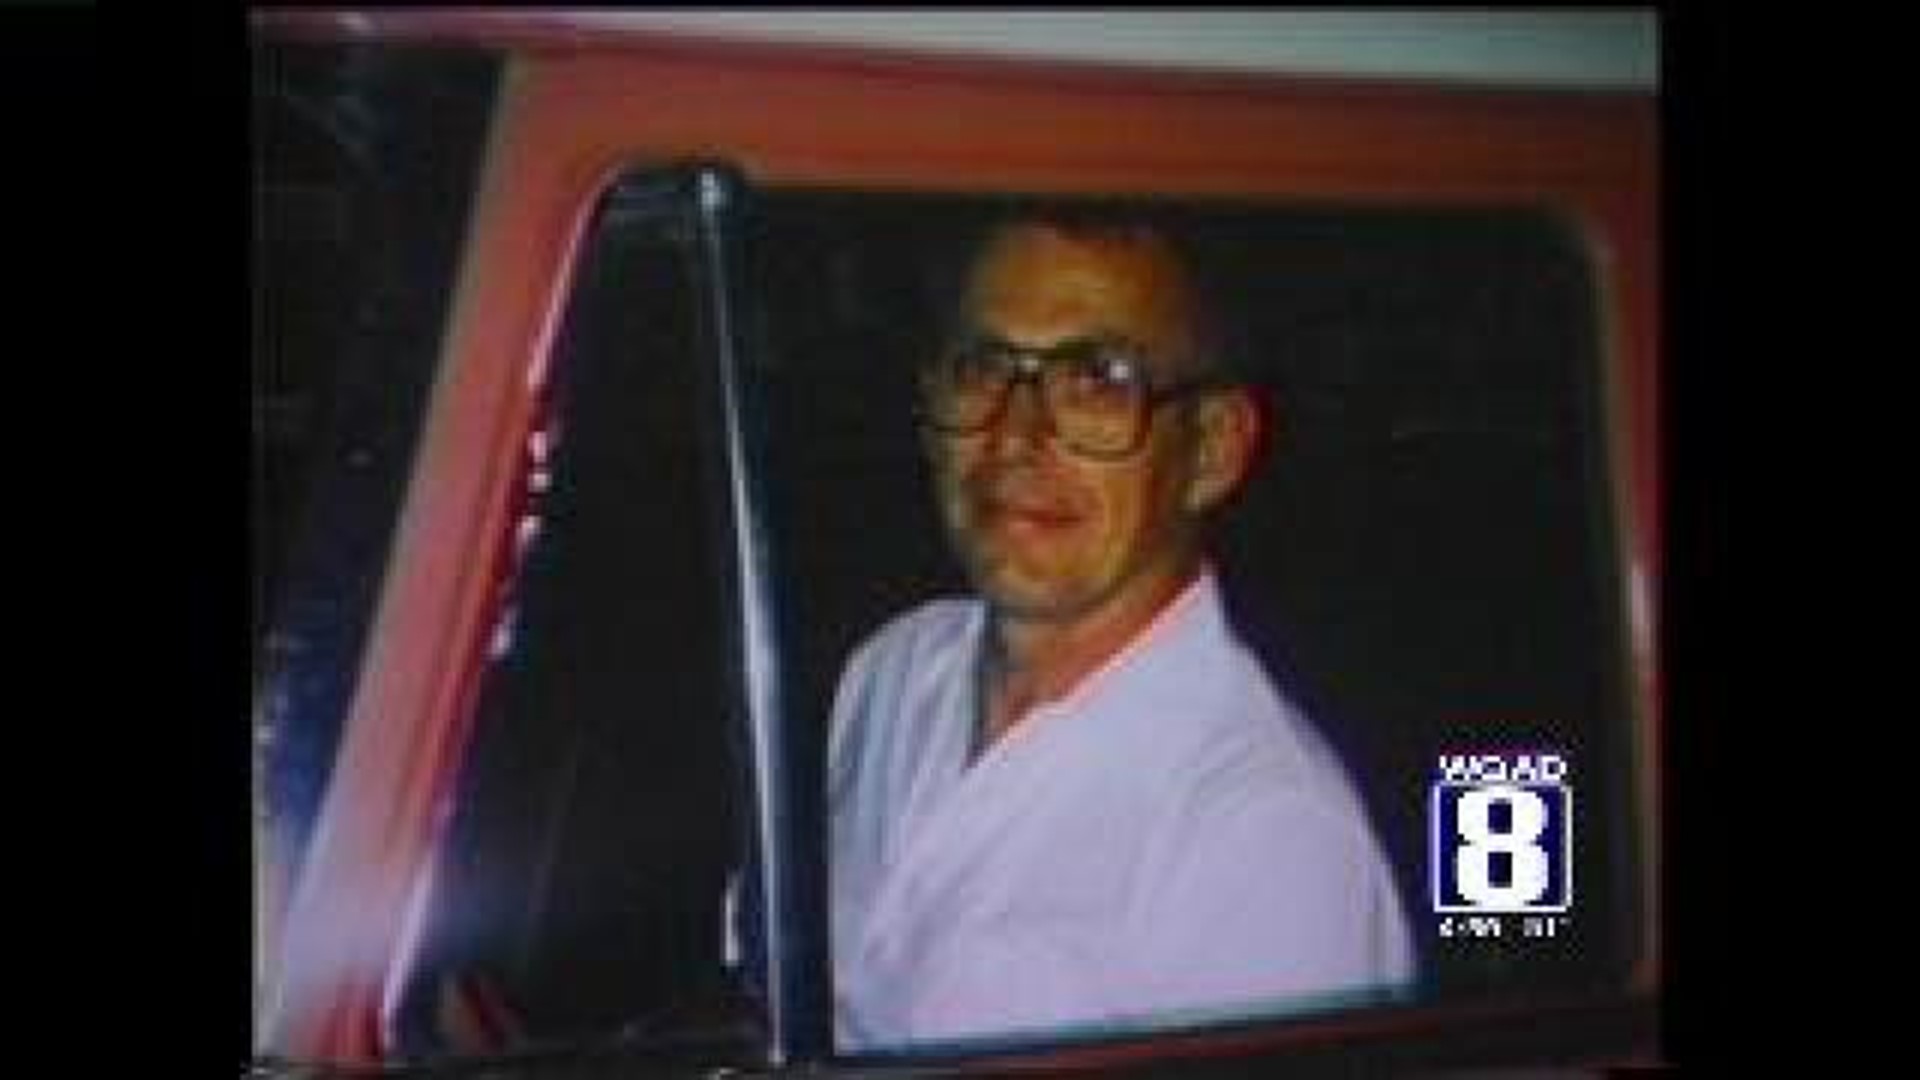 Police searching woods, looking into 1990 cold case